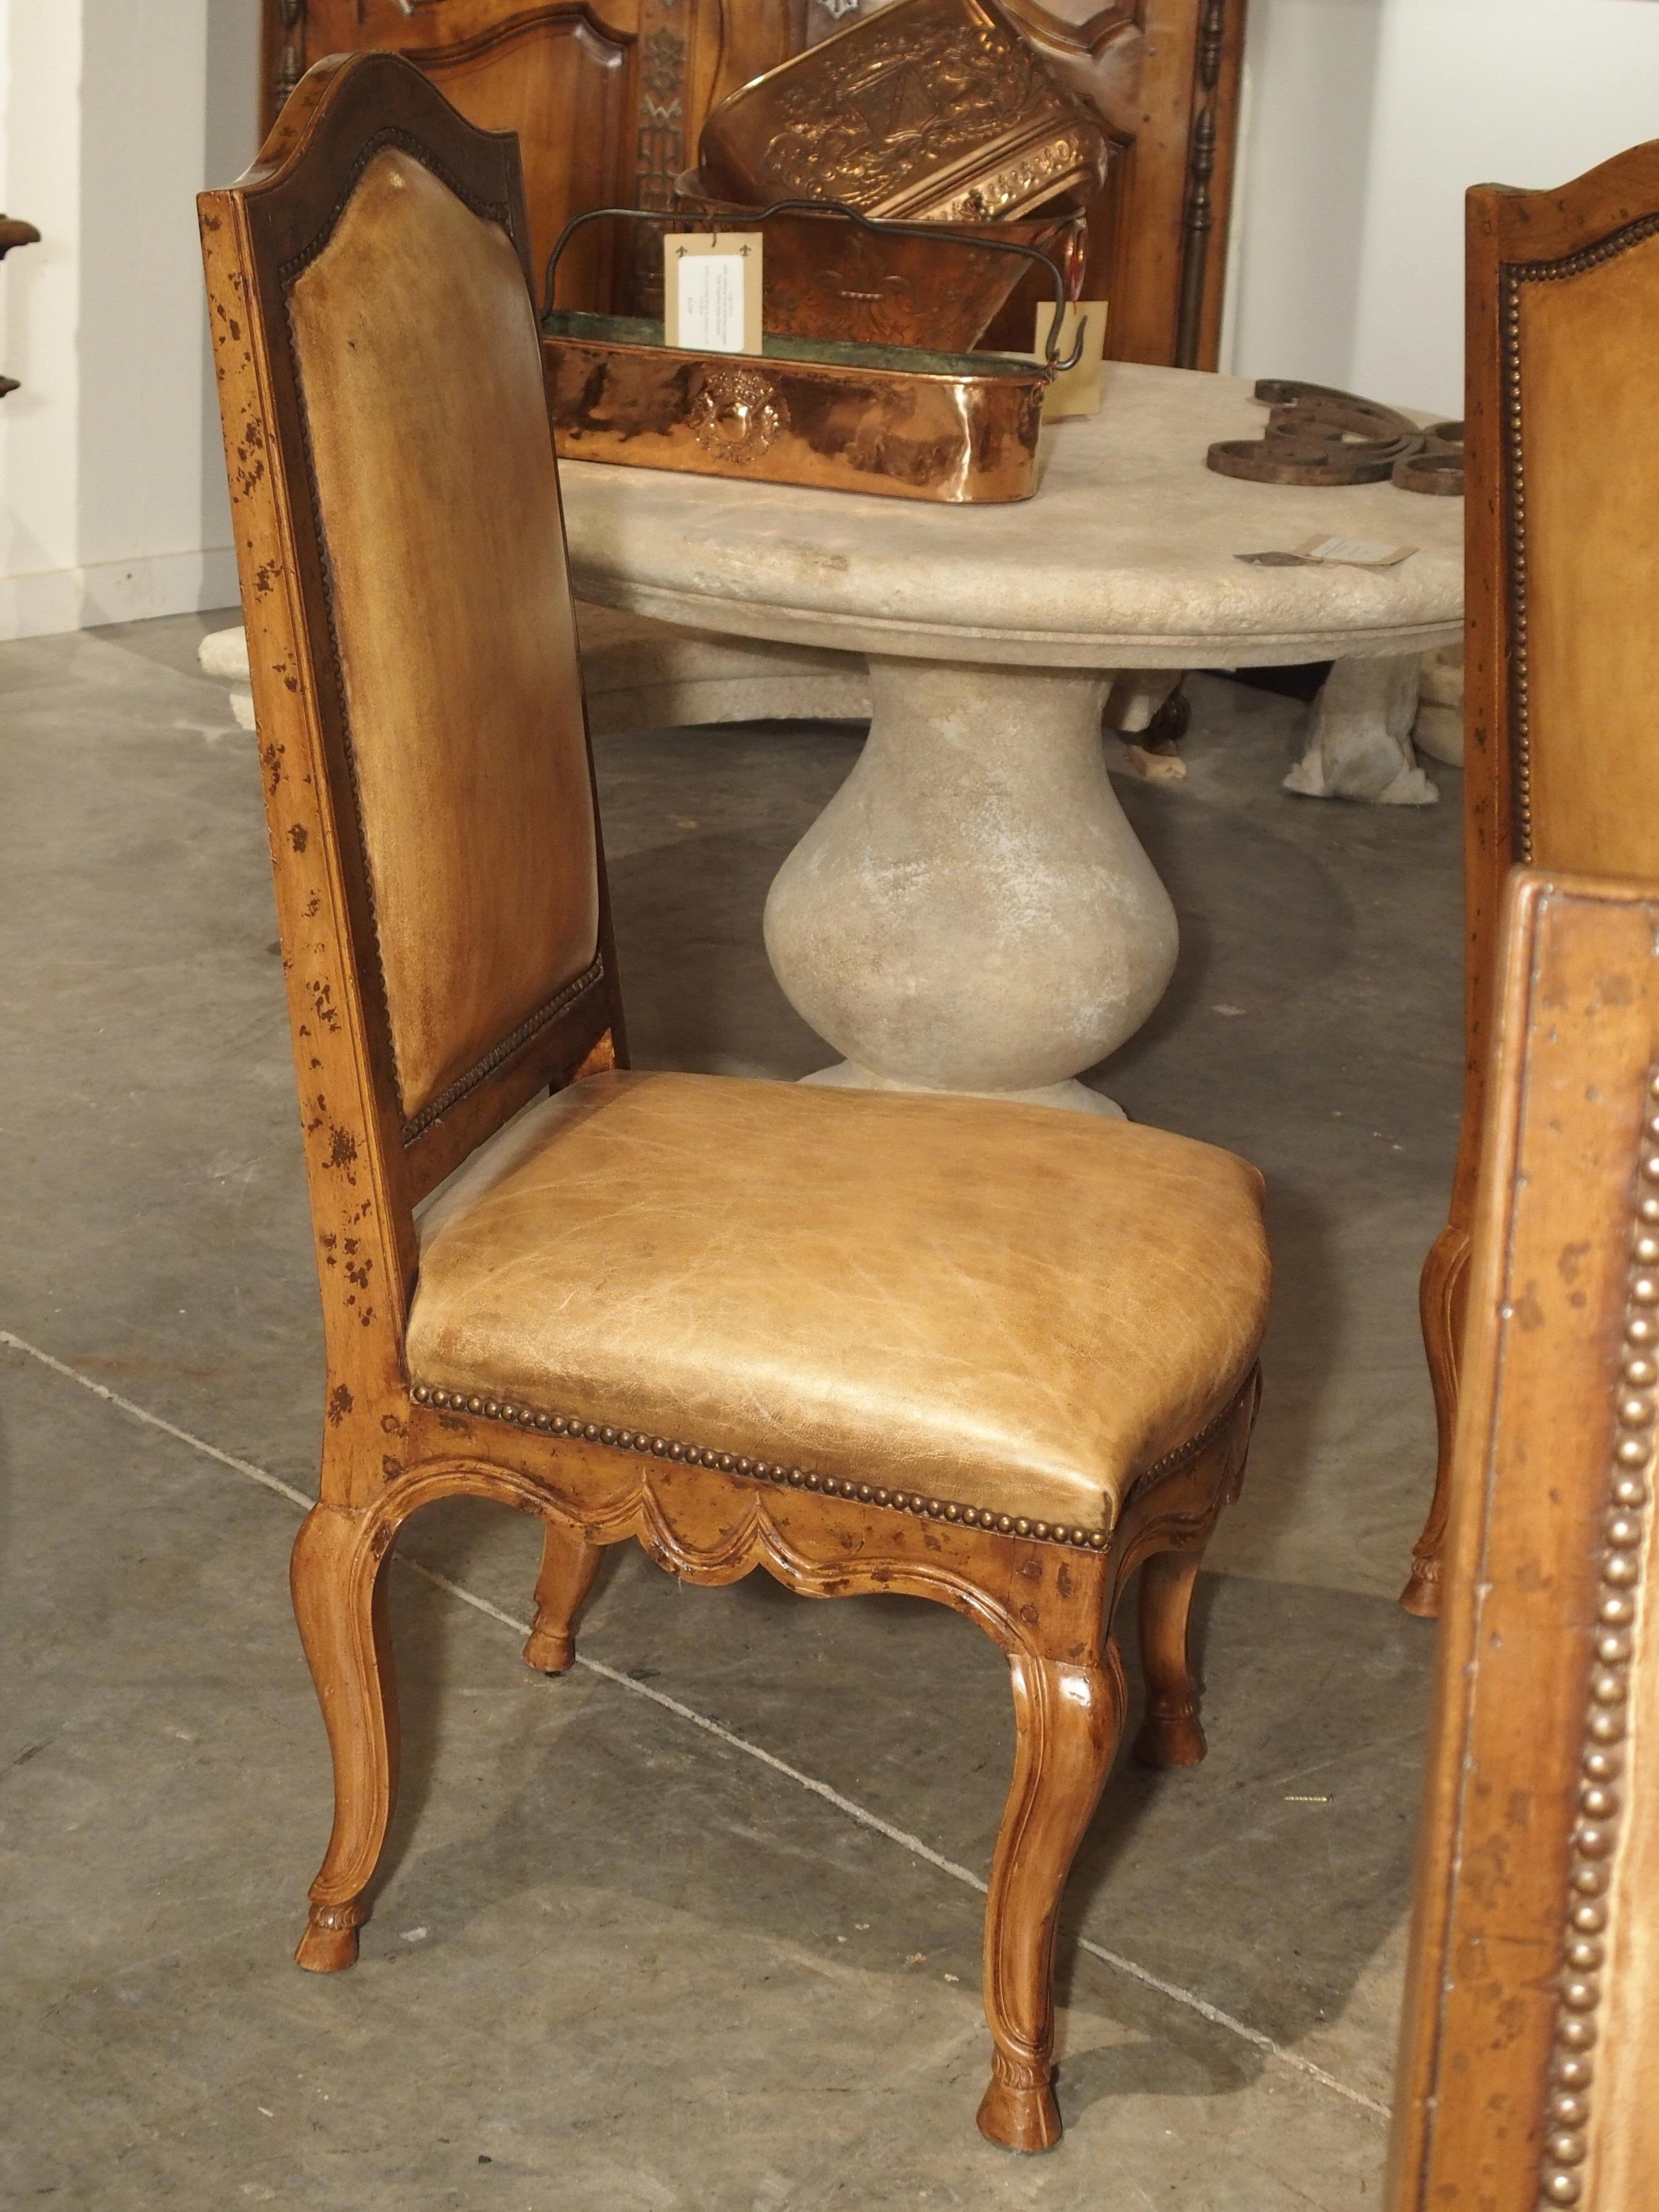 These comfortable and elegant antique Regence style leather and fruitwood chairs have double sided brass nailheads holding the leather onto the chair backs. The tops have a slight dome shape while the S-shaped legs and front rails have conforming